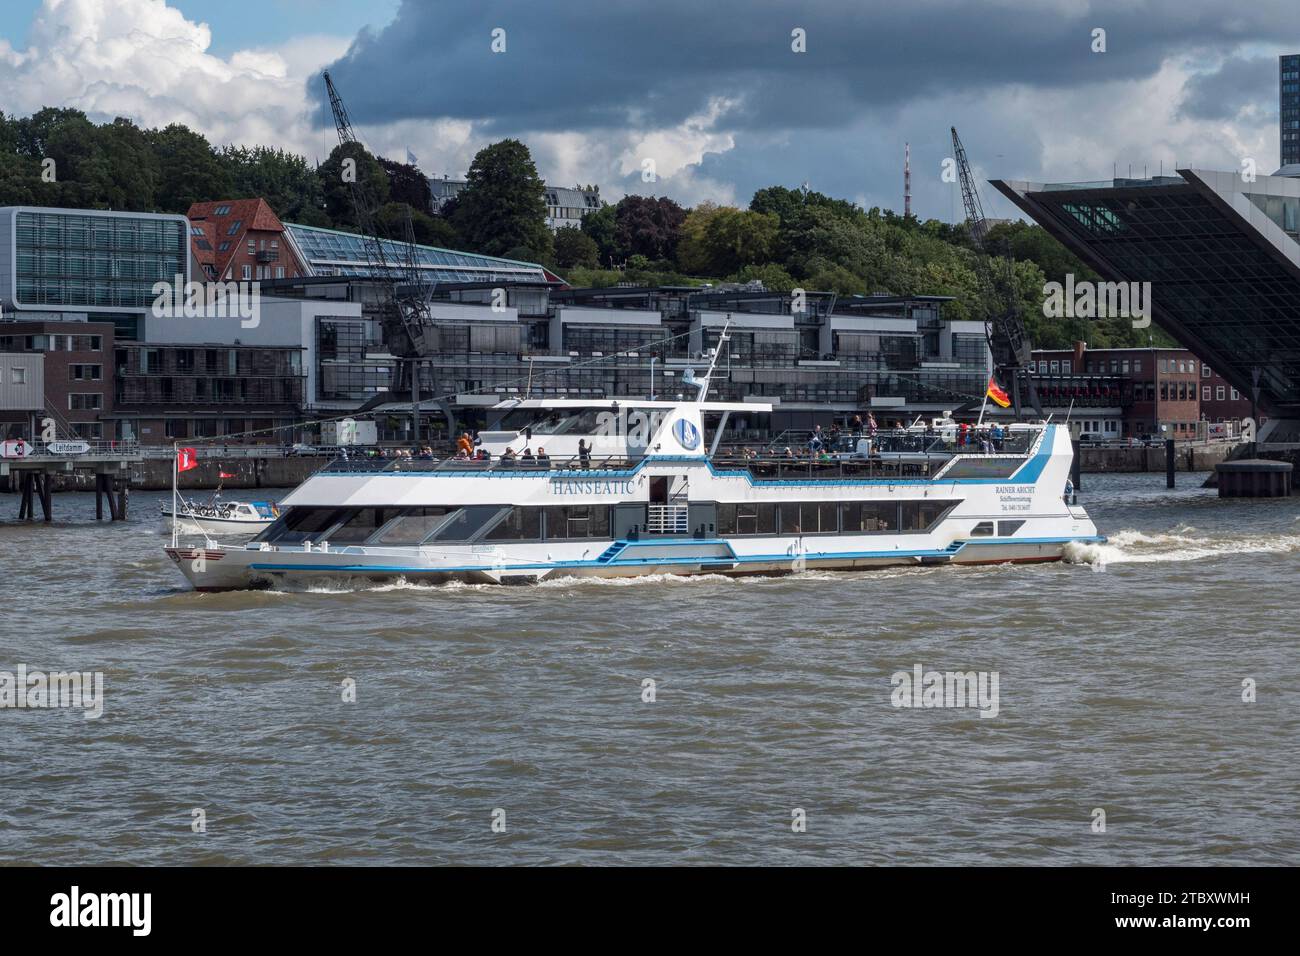 The MS Hanseatic guided tour boat on the River Elbe viewed from the 62 HADAG ferry in Hamburg, Germany. Stock Photo